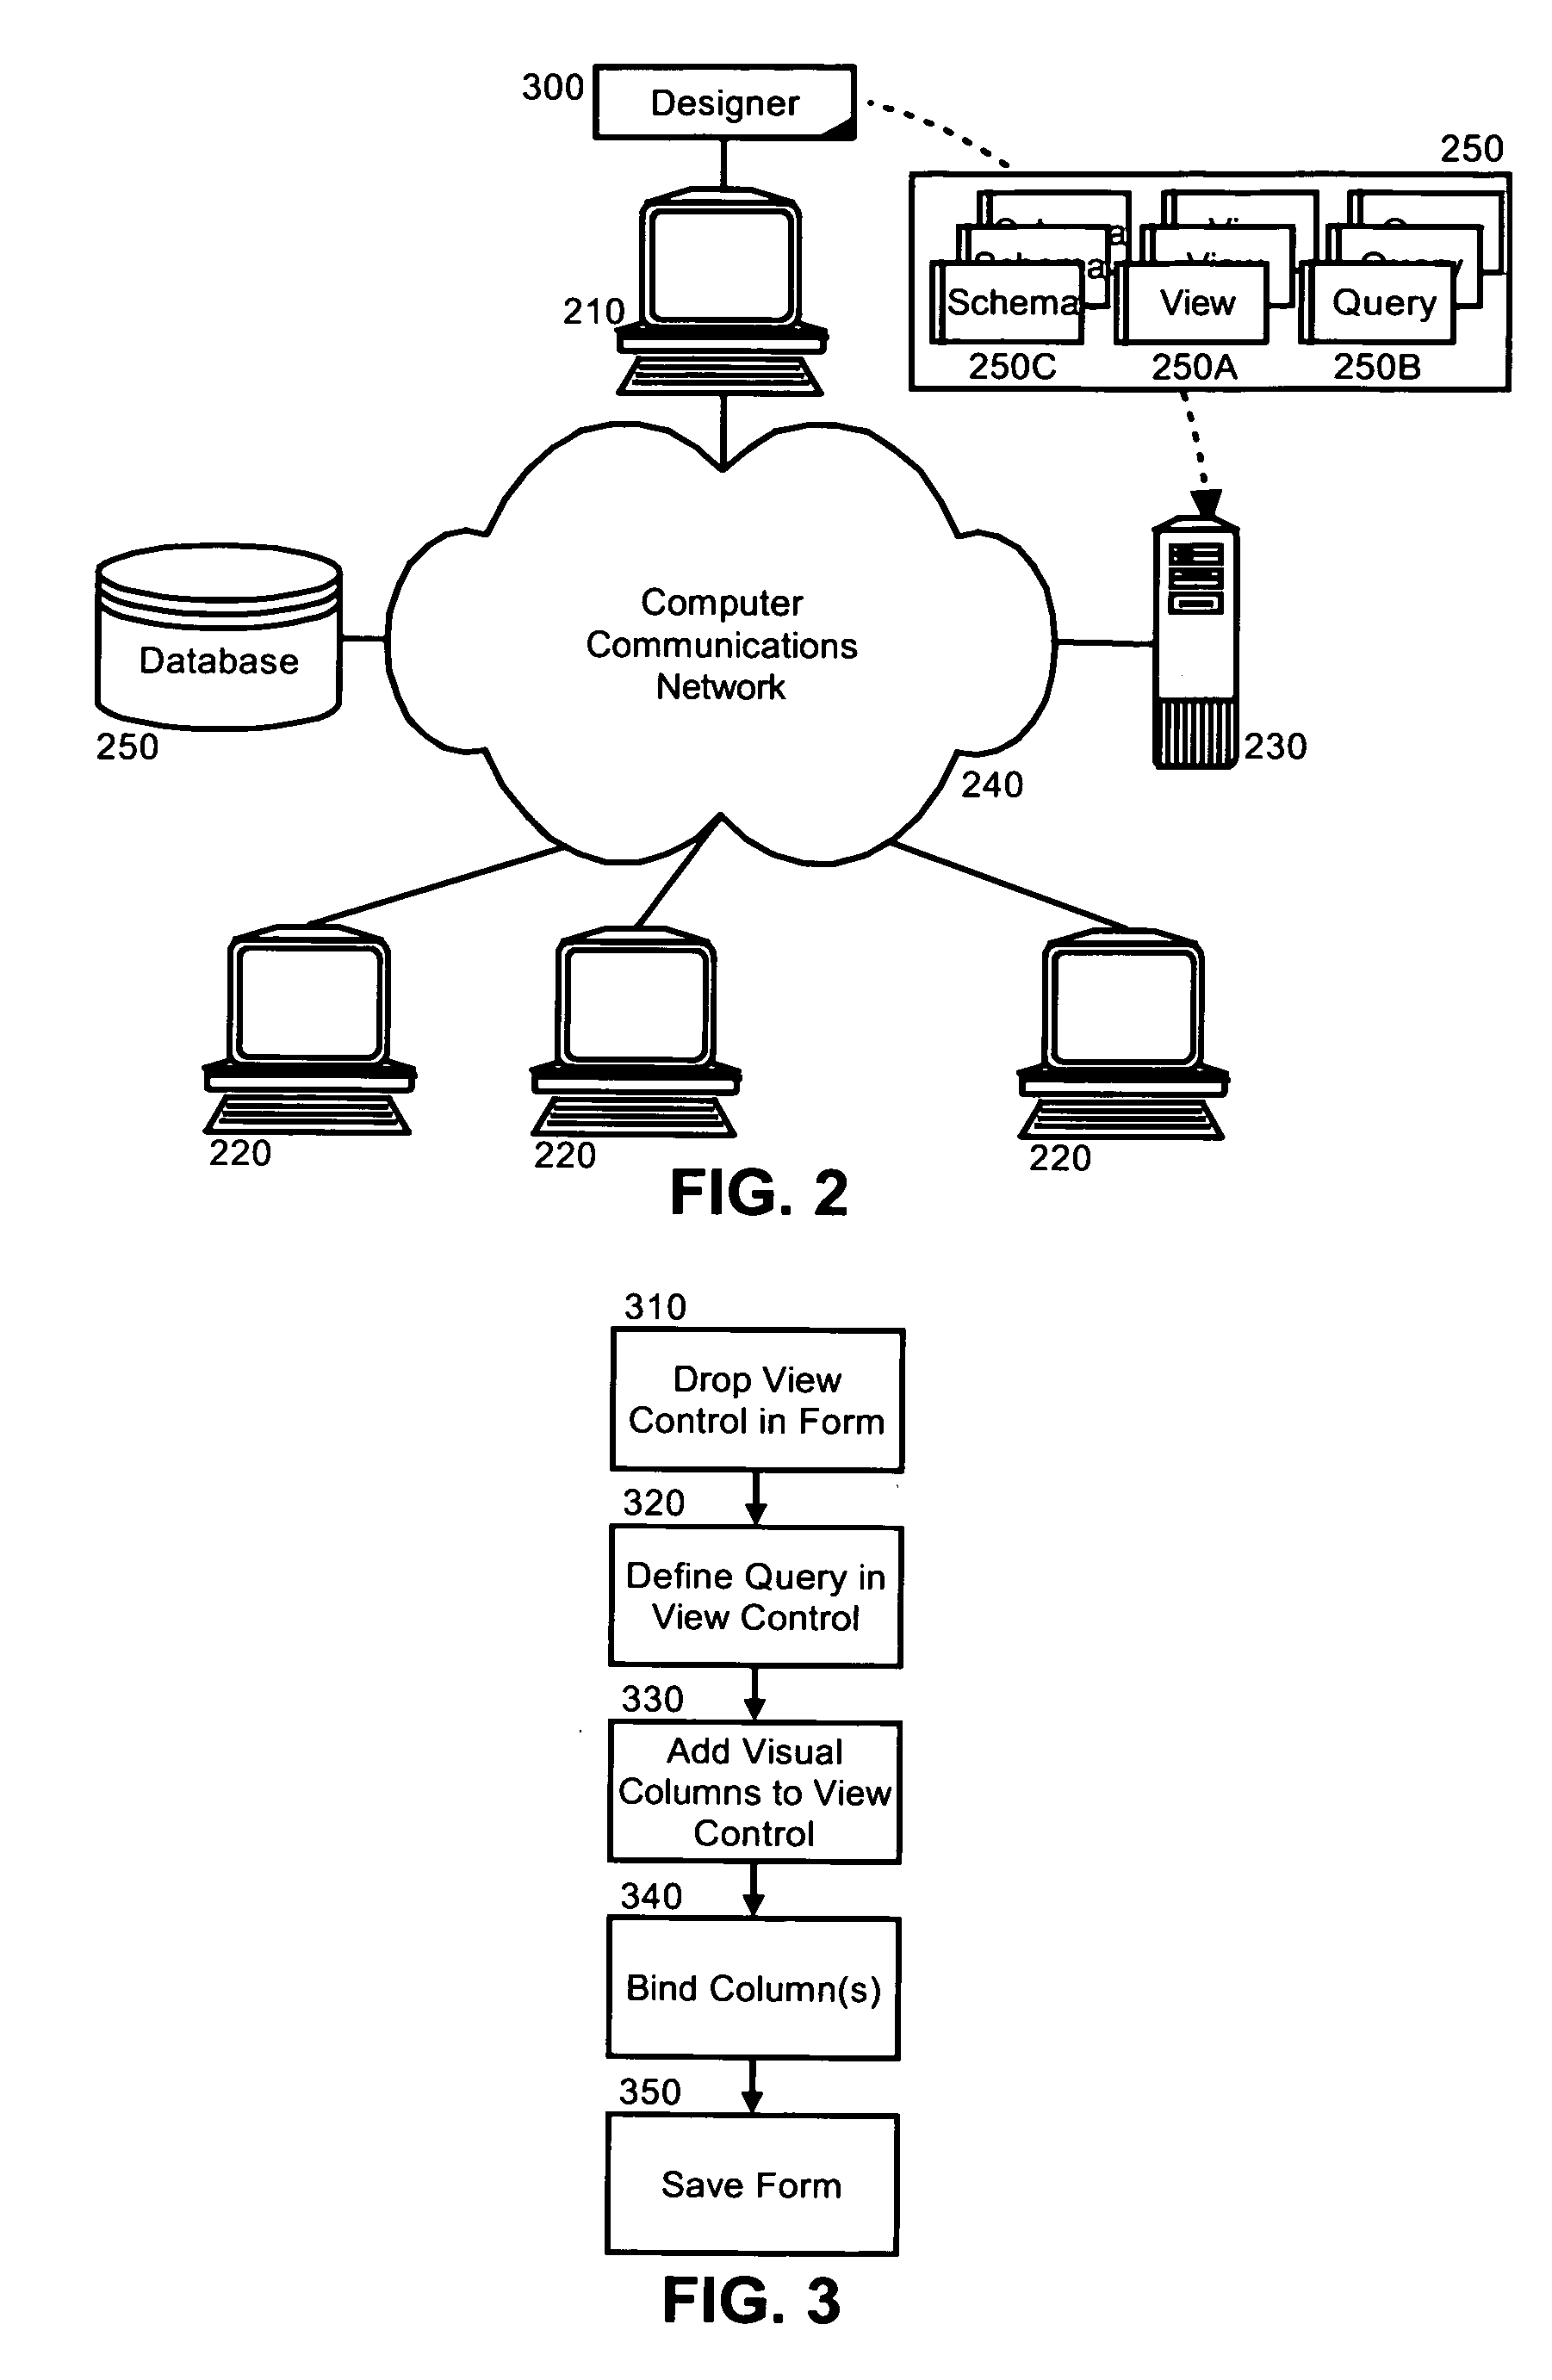 Generating a separable query design object and database schema through visual view editing